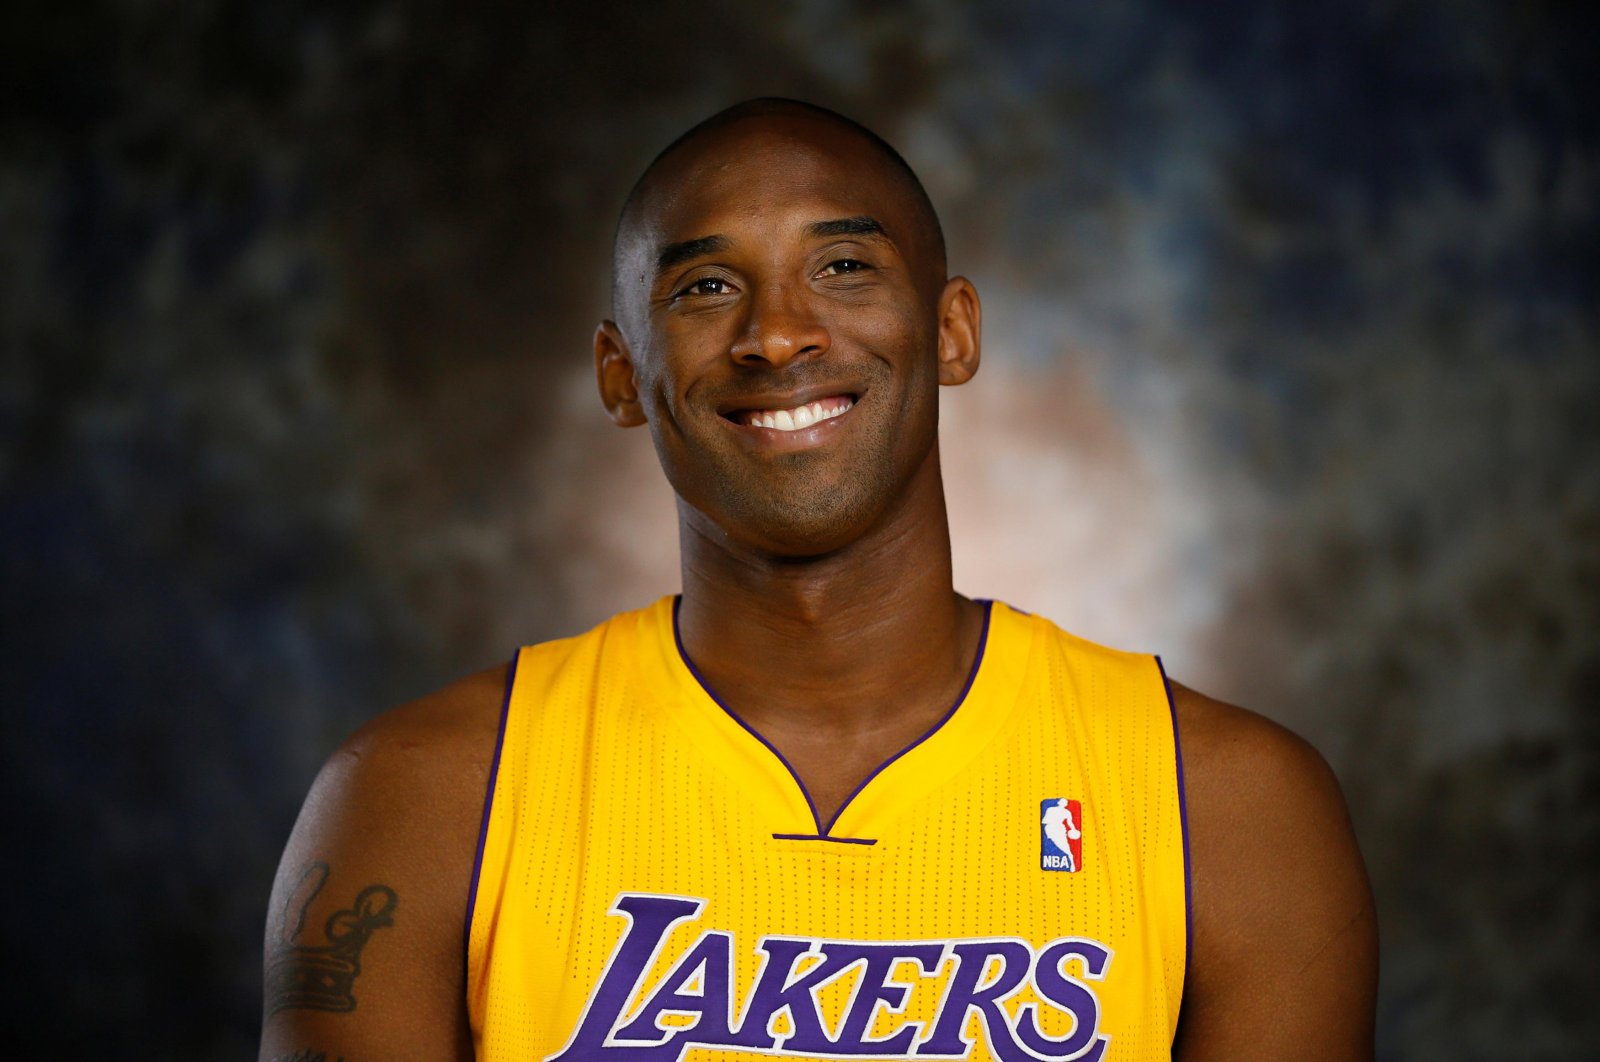 File photo of Kobe Bryant during an interview in Los Angeles, U.S., Oct. 1, 2012. (Reuters Photo)